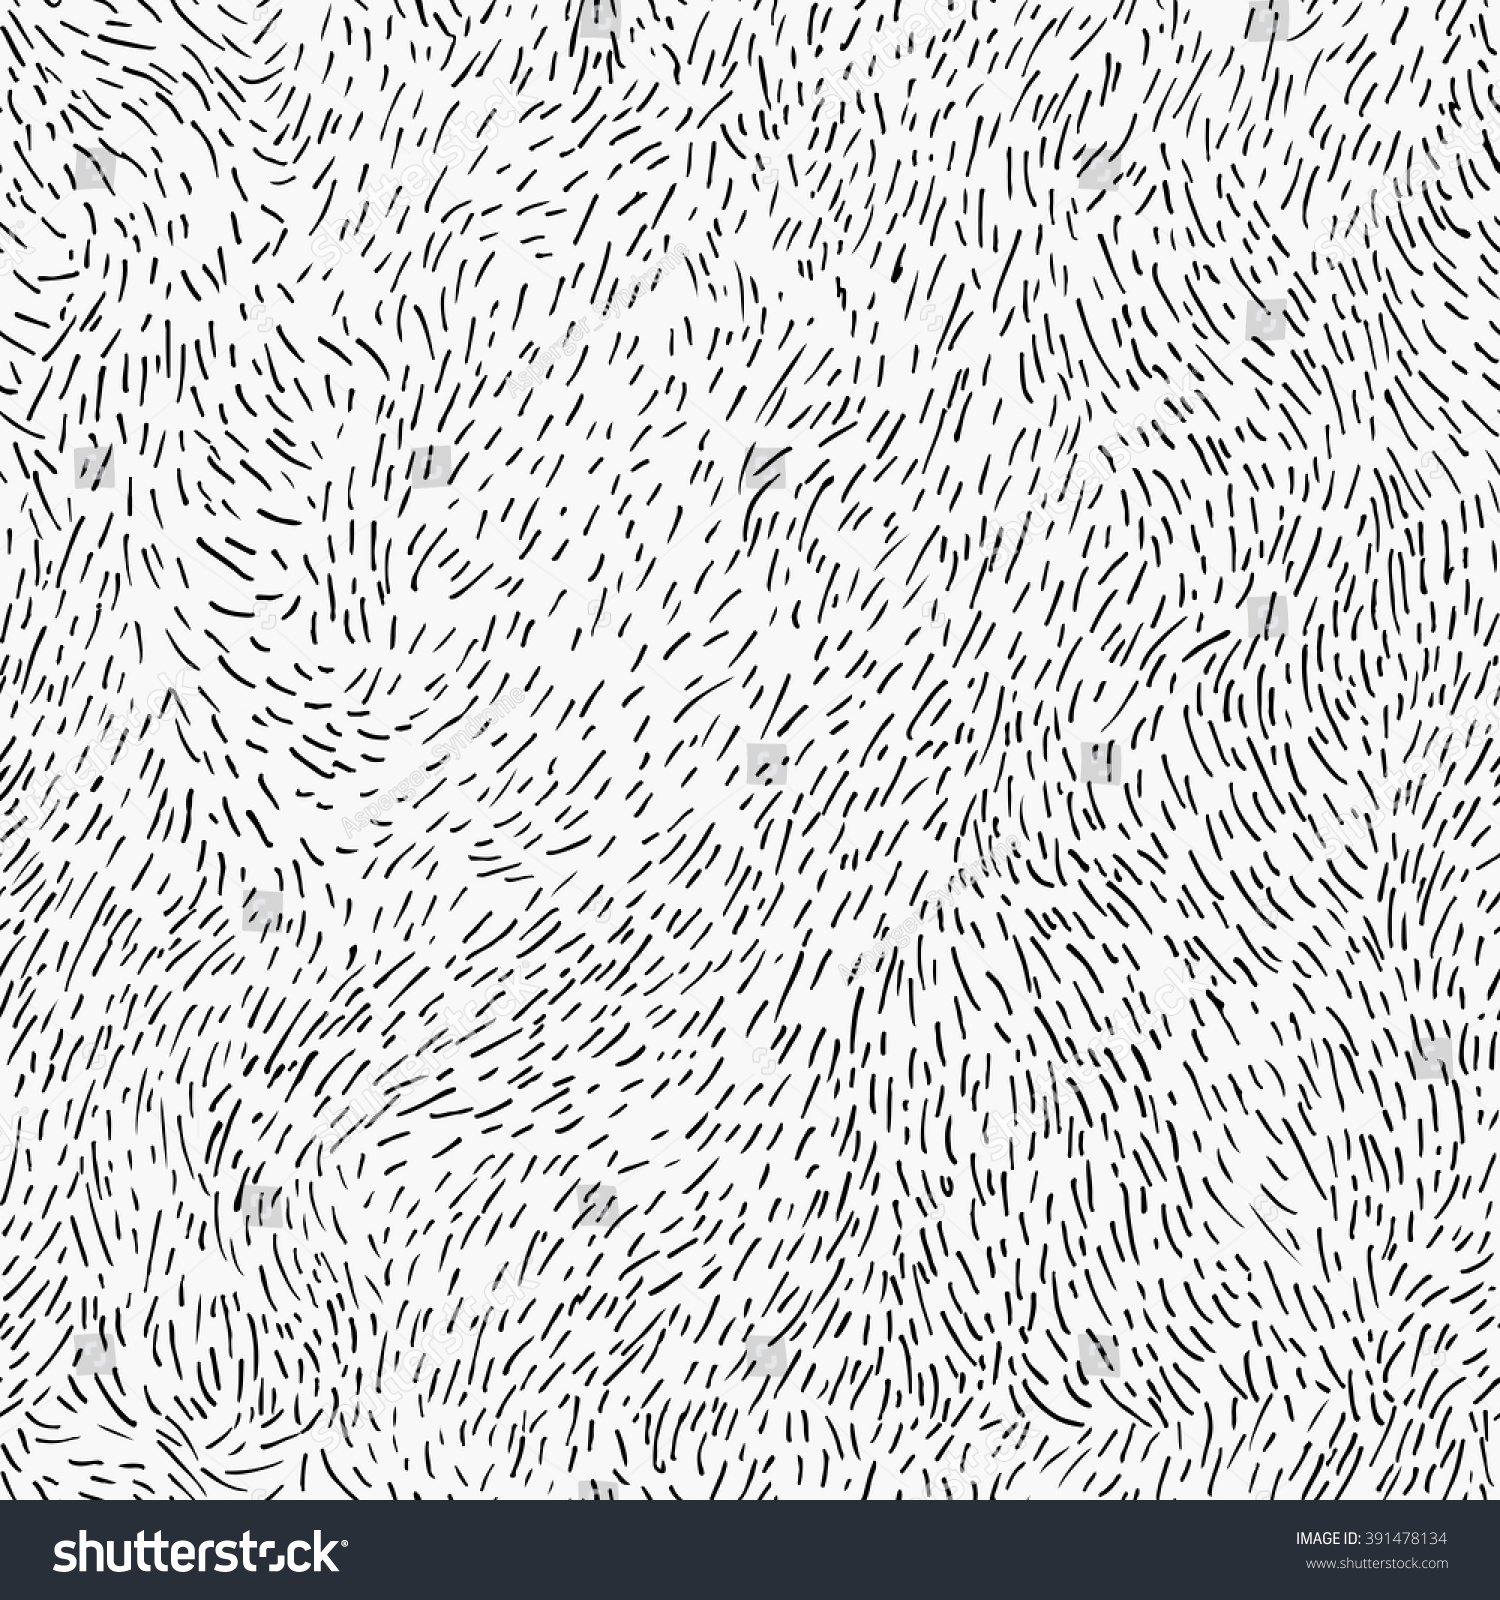 Handmade seamless texture - dashed line drawn by pen. Perfect as background for greeting cards, business cards, covers, and more. Vector Illustration. #391478134